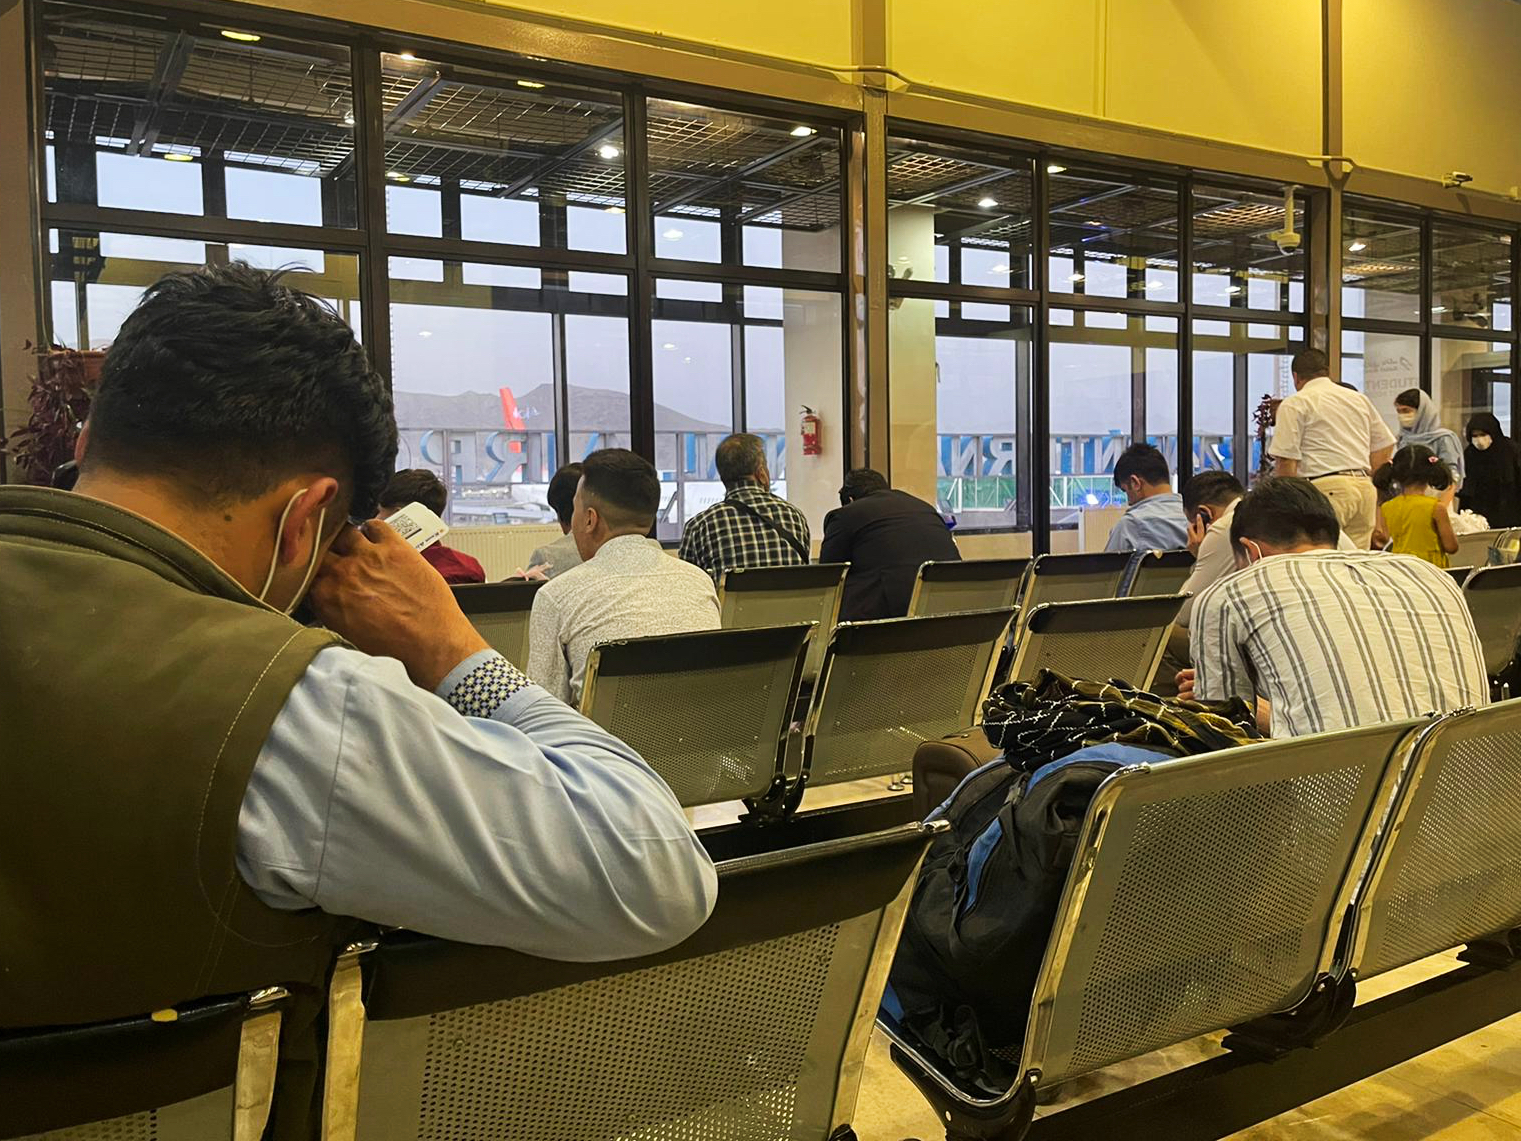 Passengers trying to fly out of Kabul International Airport wait in the terminal in Kabul, Afghanistan on Friday, August 13th 2021.